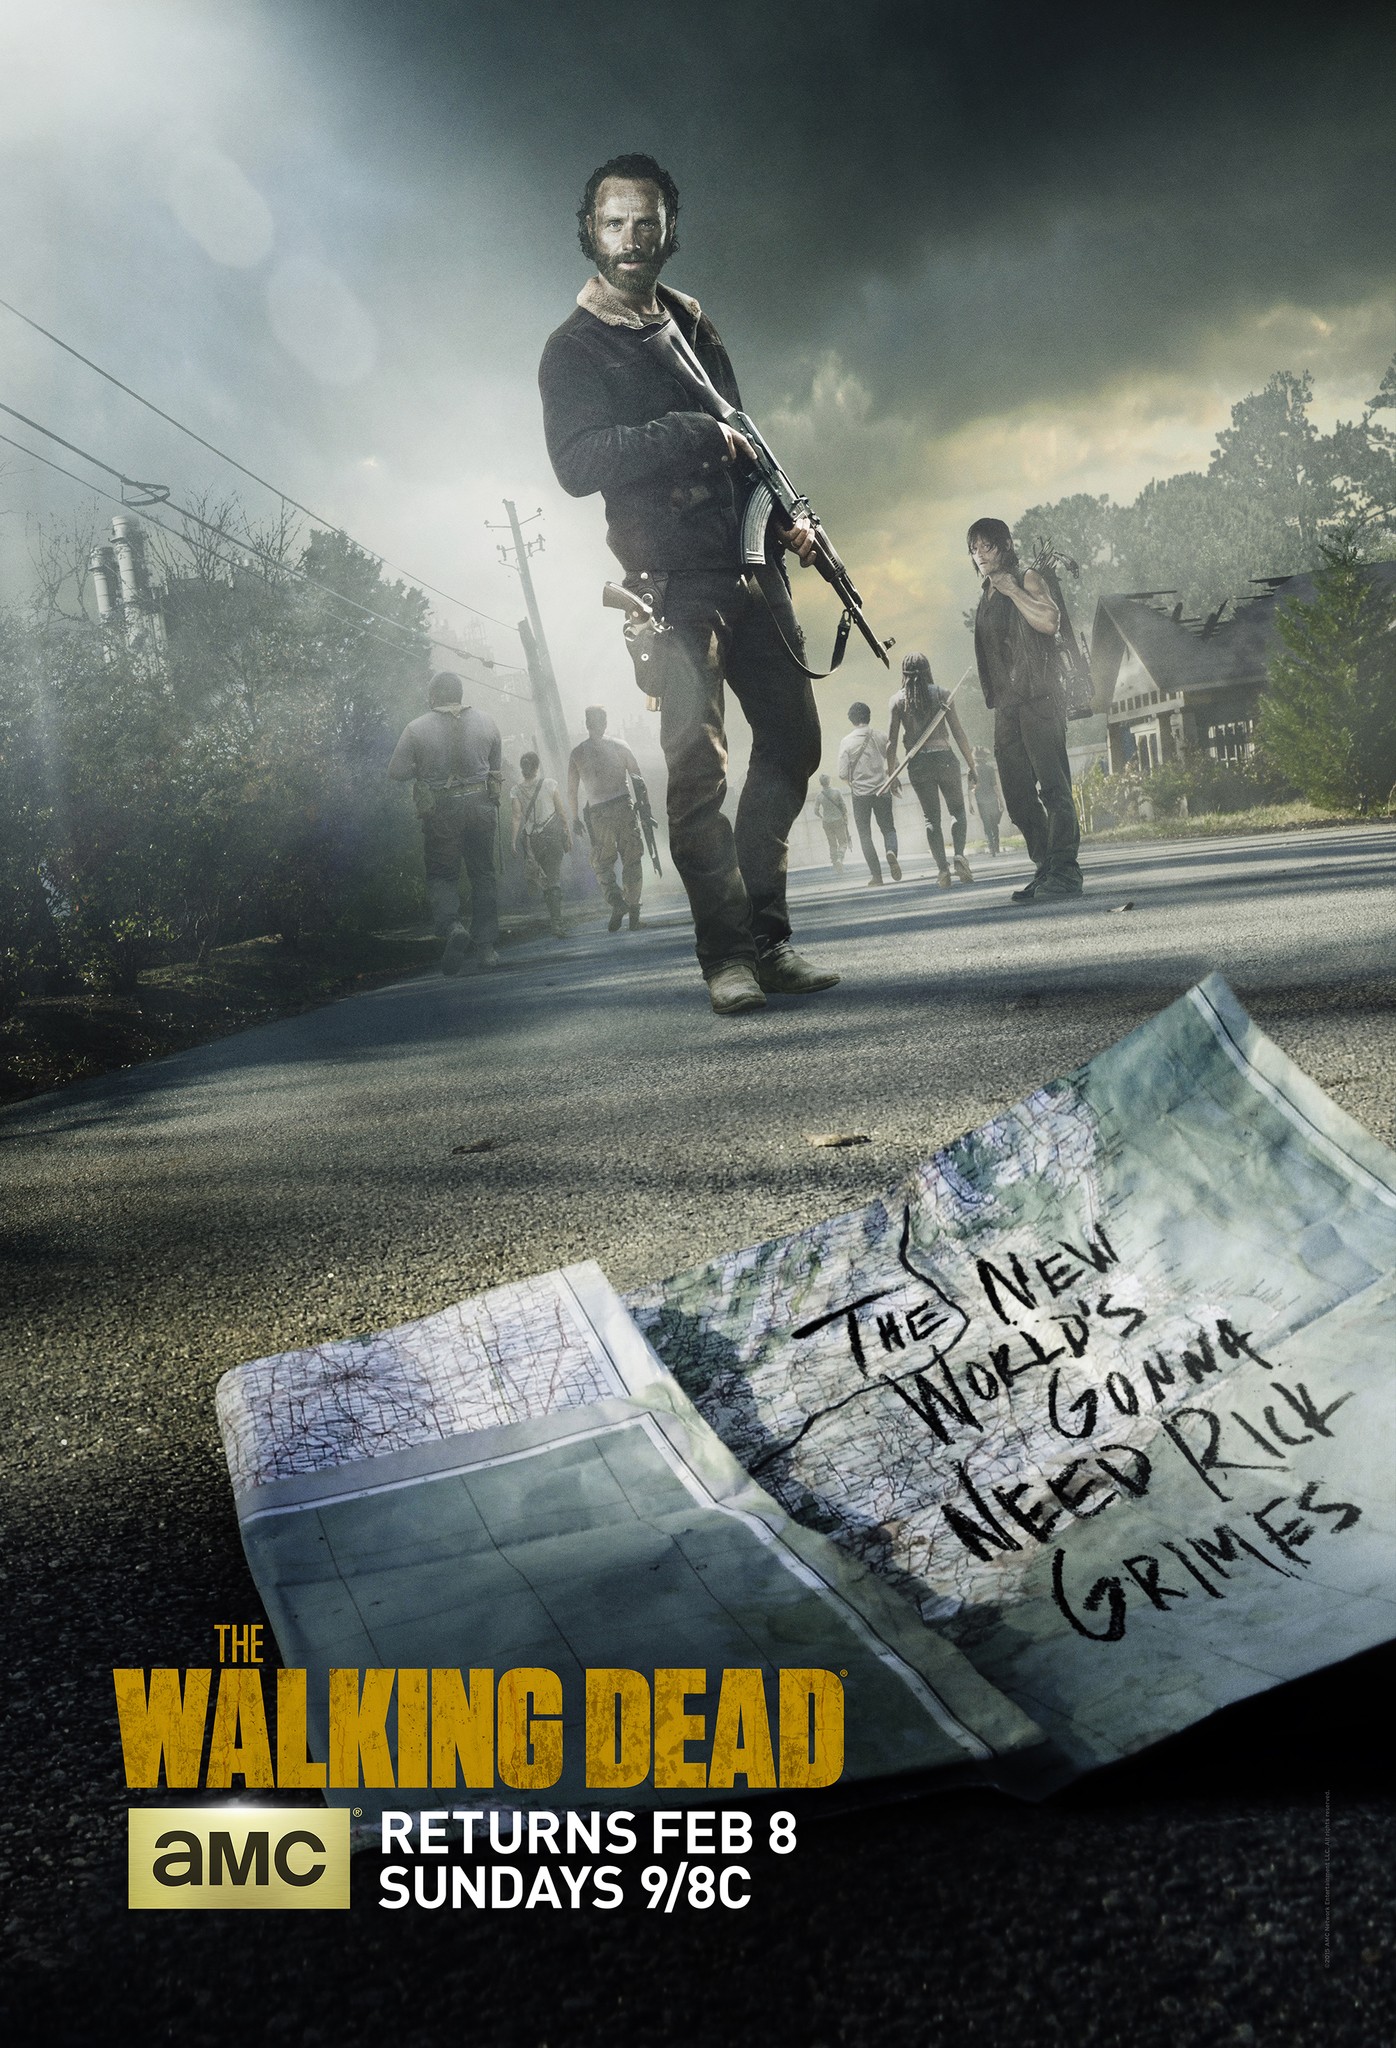 The Walking Dead's Season 9 Poster Hints at Major Changes to Come